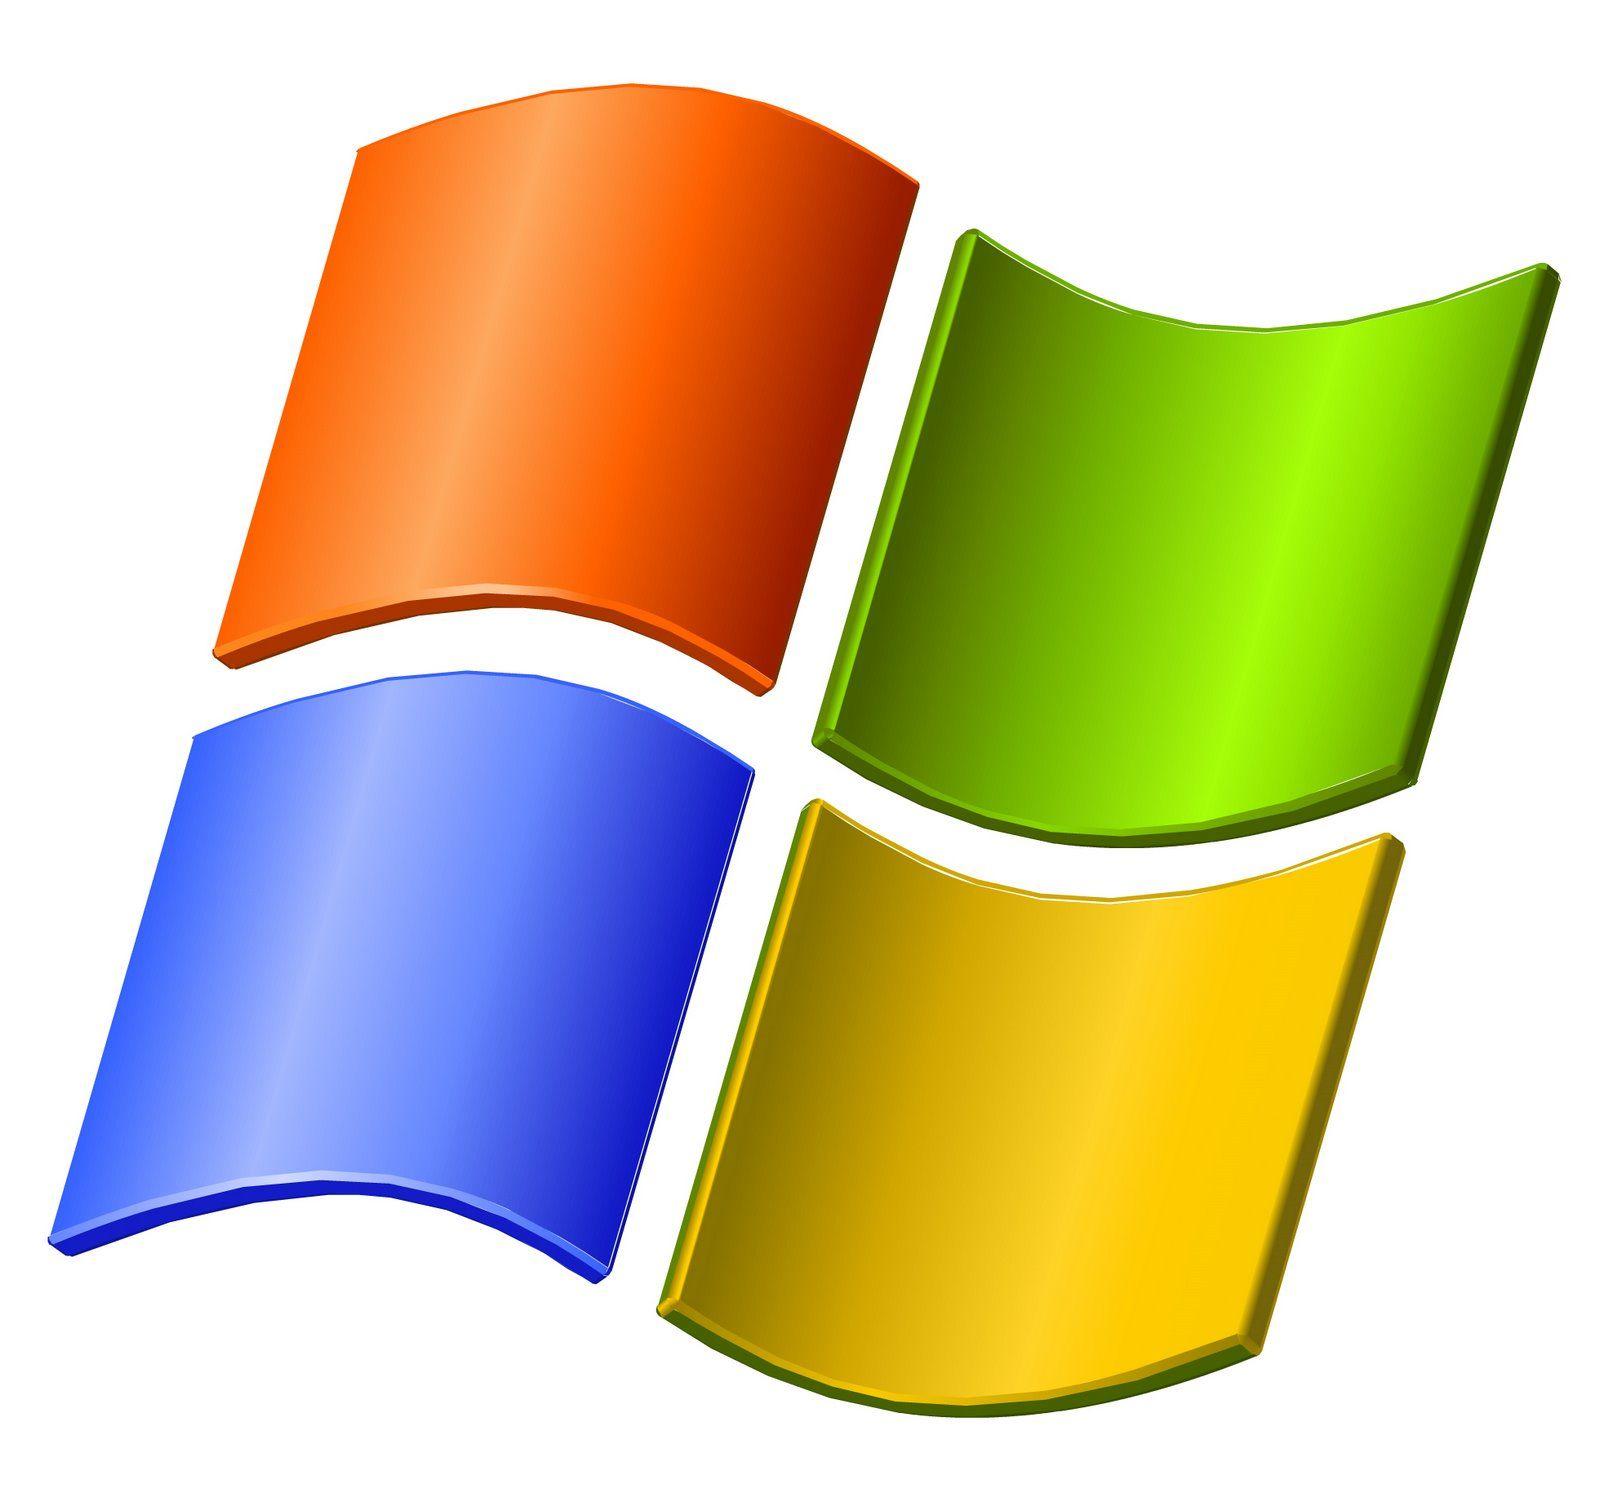 Old Microsoft Logo - Microsoft Offers Bounty to Hackers for Hacking Windows 8 - SiliconANGLE